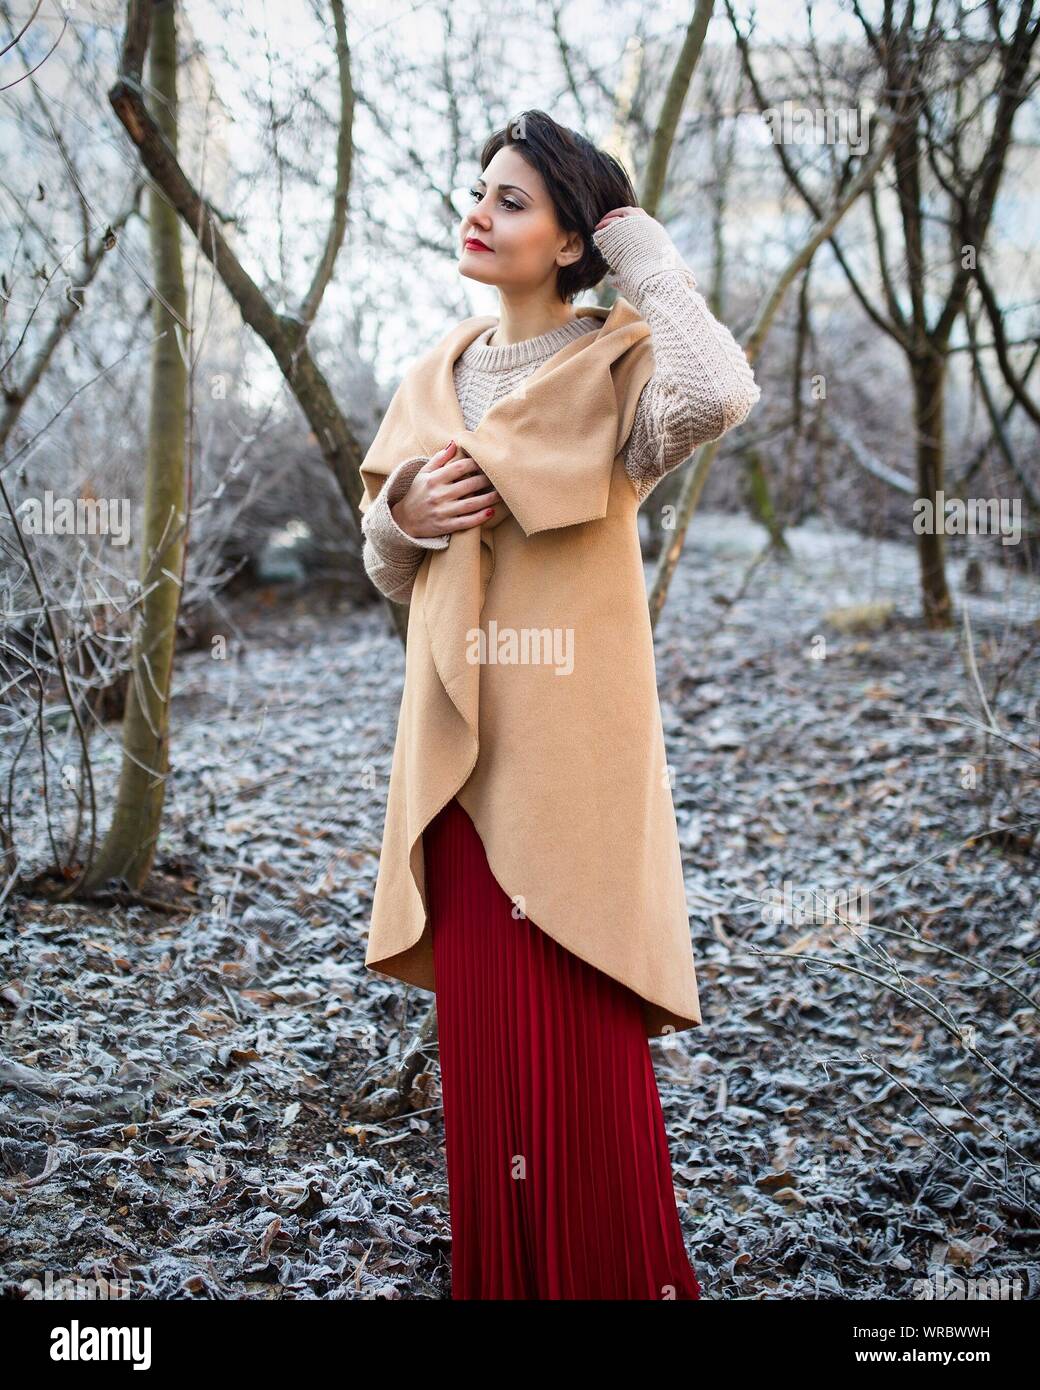 Woman In Long Dress Standing Against Trees On Field During Winter Stock Photo